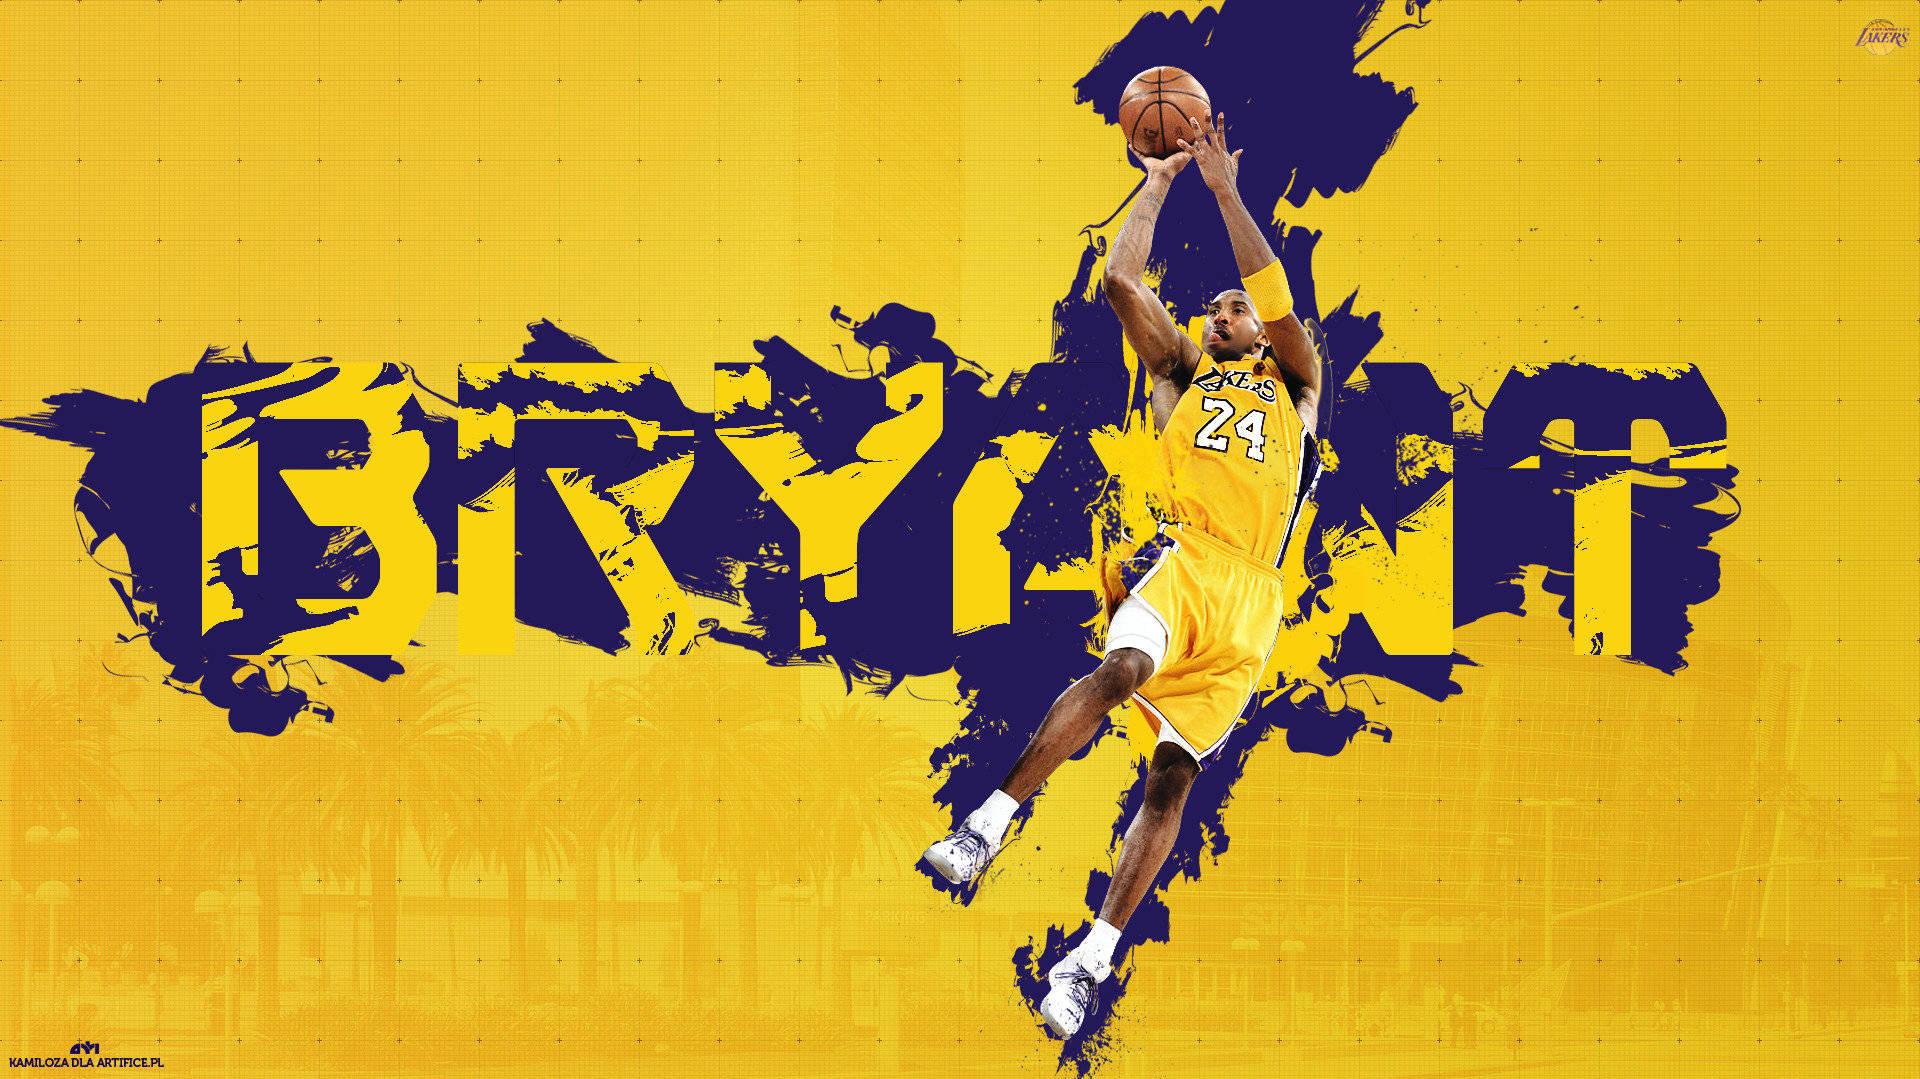 Nba Legend Kobe Bryant In An Iconic Purple And Yellow